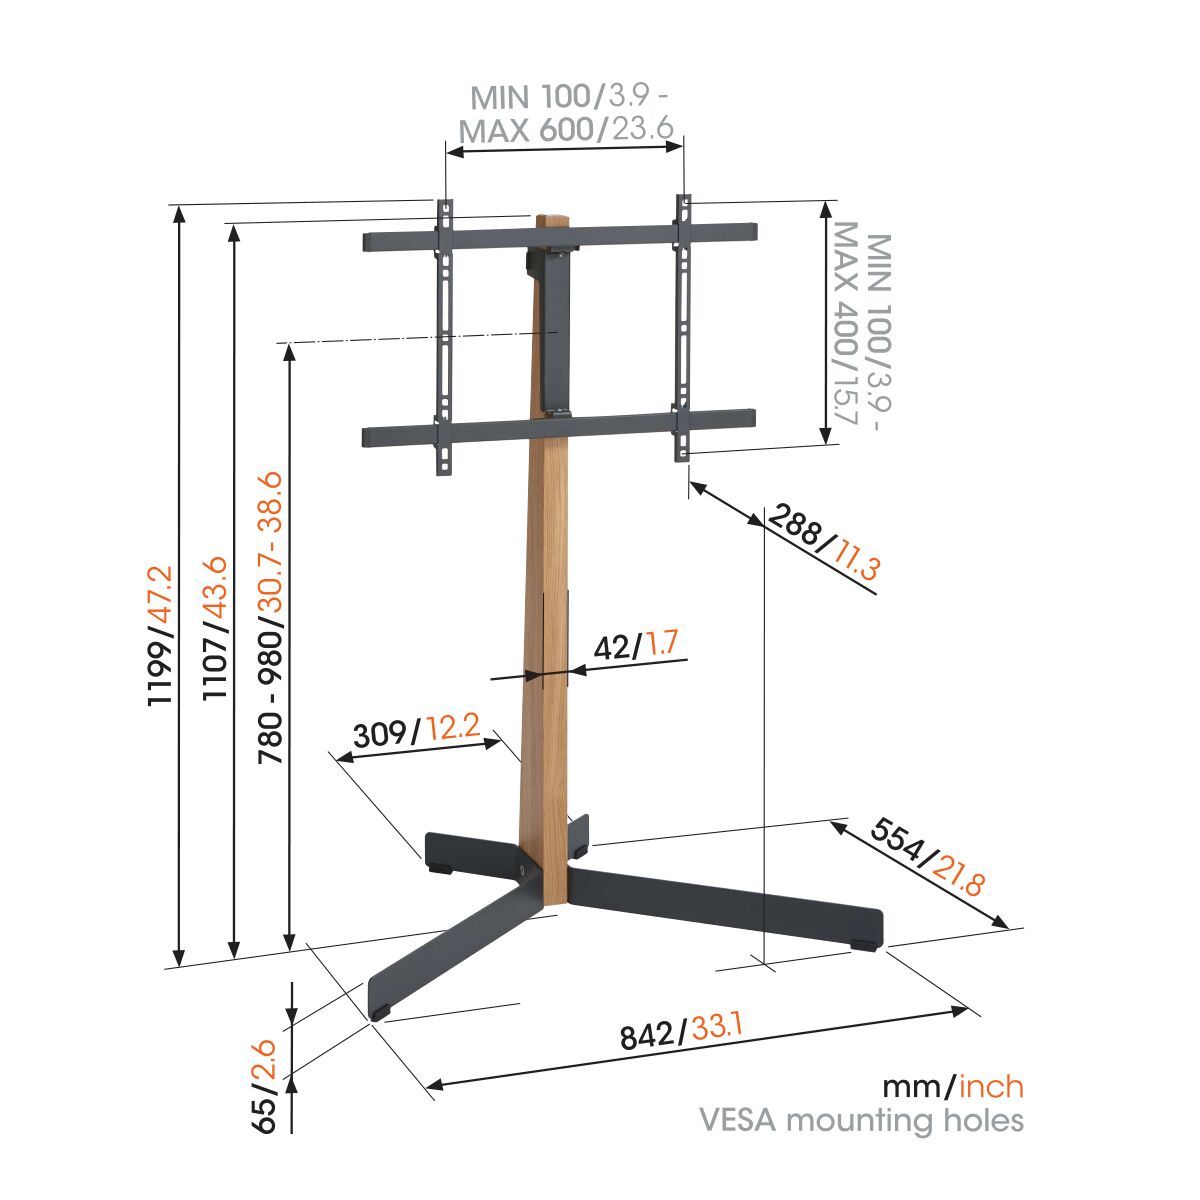 Vogel's TVS 3695 TV Floor Stand (black) - Suitable for 40 up to 77 inch TVs up to 50 kg - Dimensions